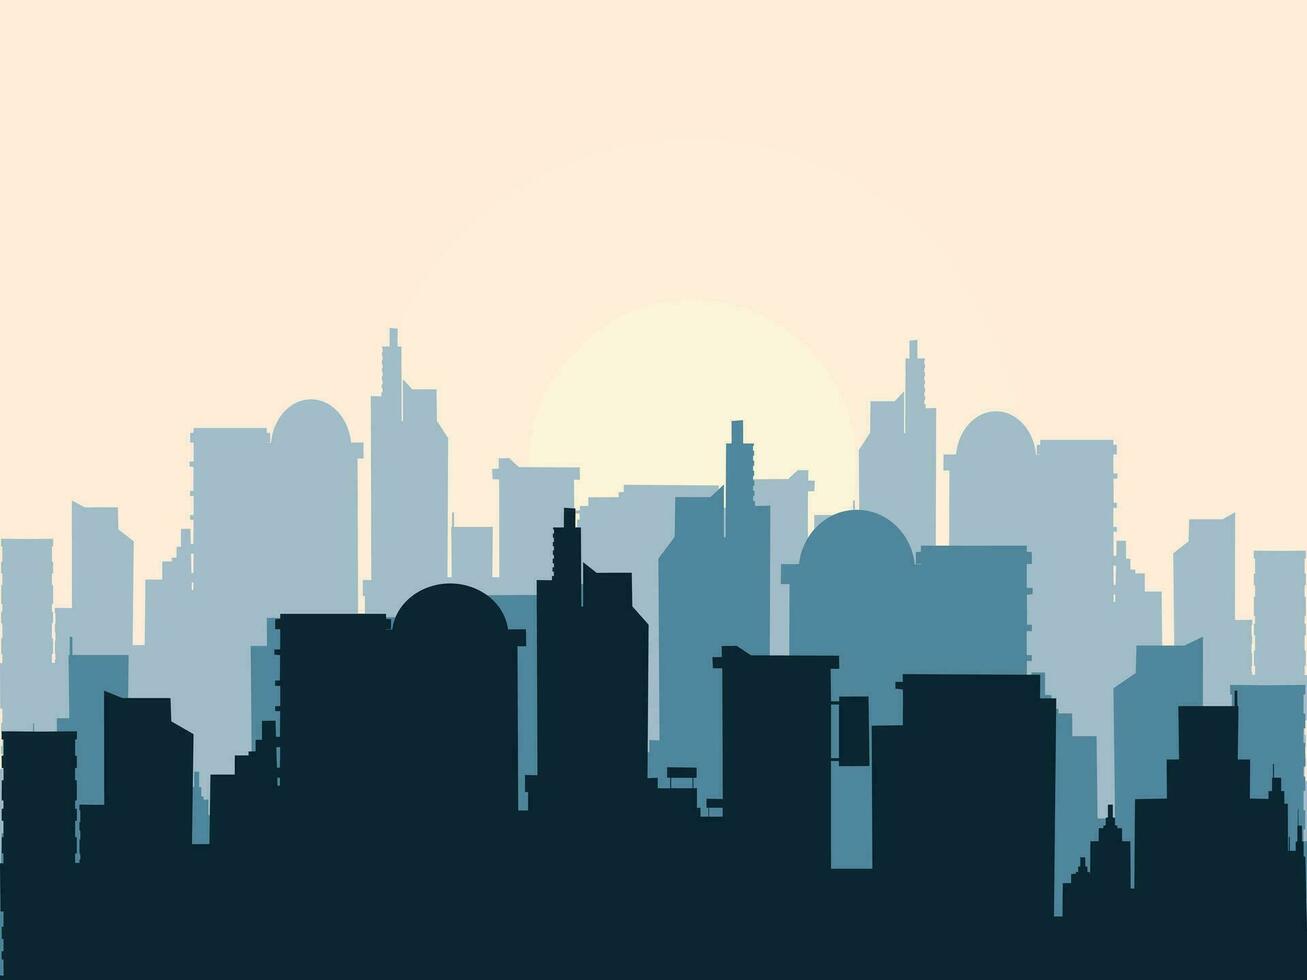 vector Silhouette of the city.Abstract city building.banner background